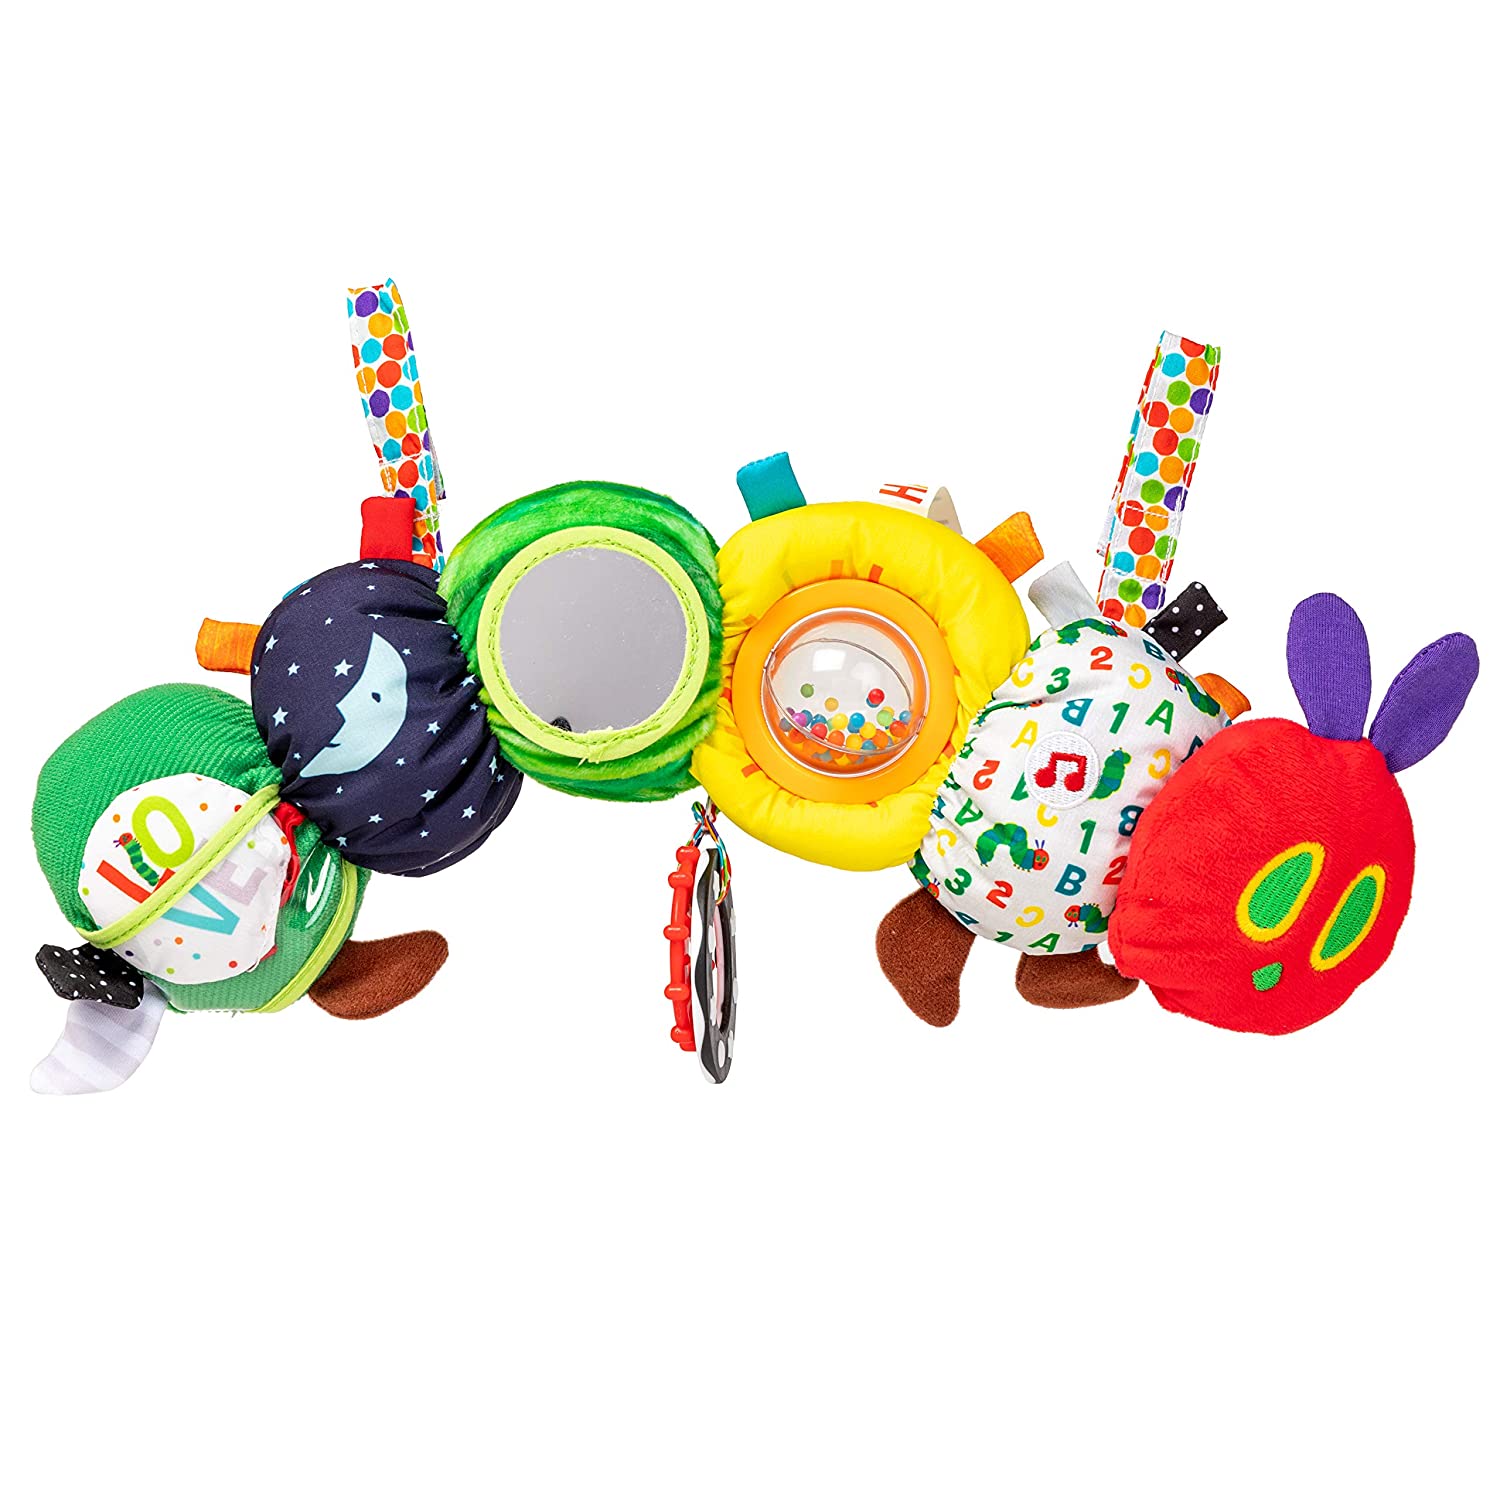 World of Eric Carle The Very Hungry Caterpillar Activity Toy